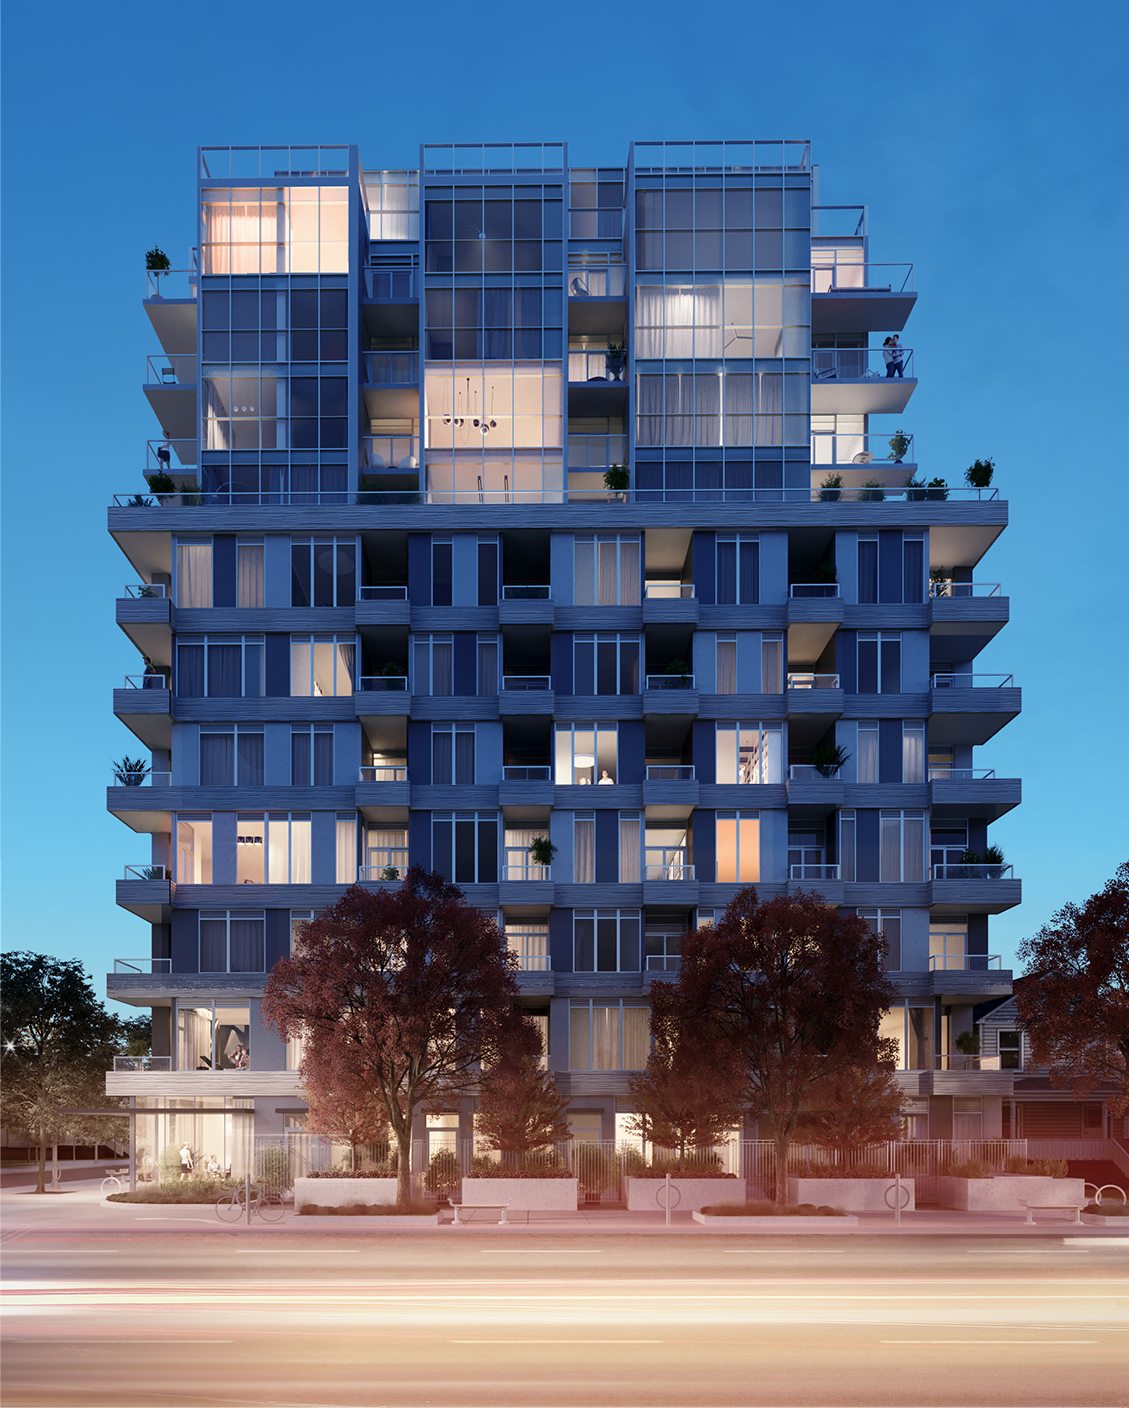 The Cardiff condos rendering of the building exterior at night